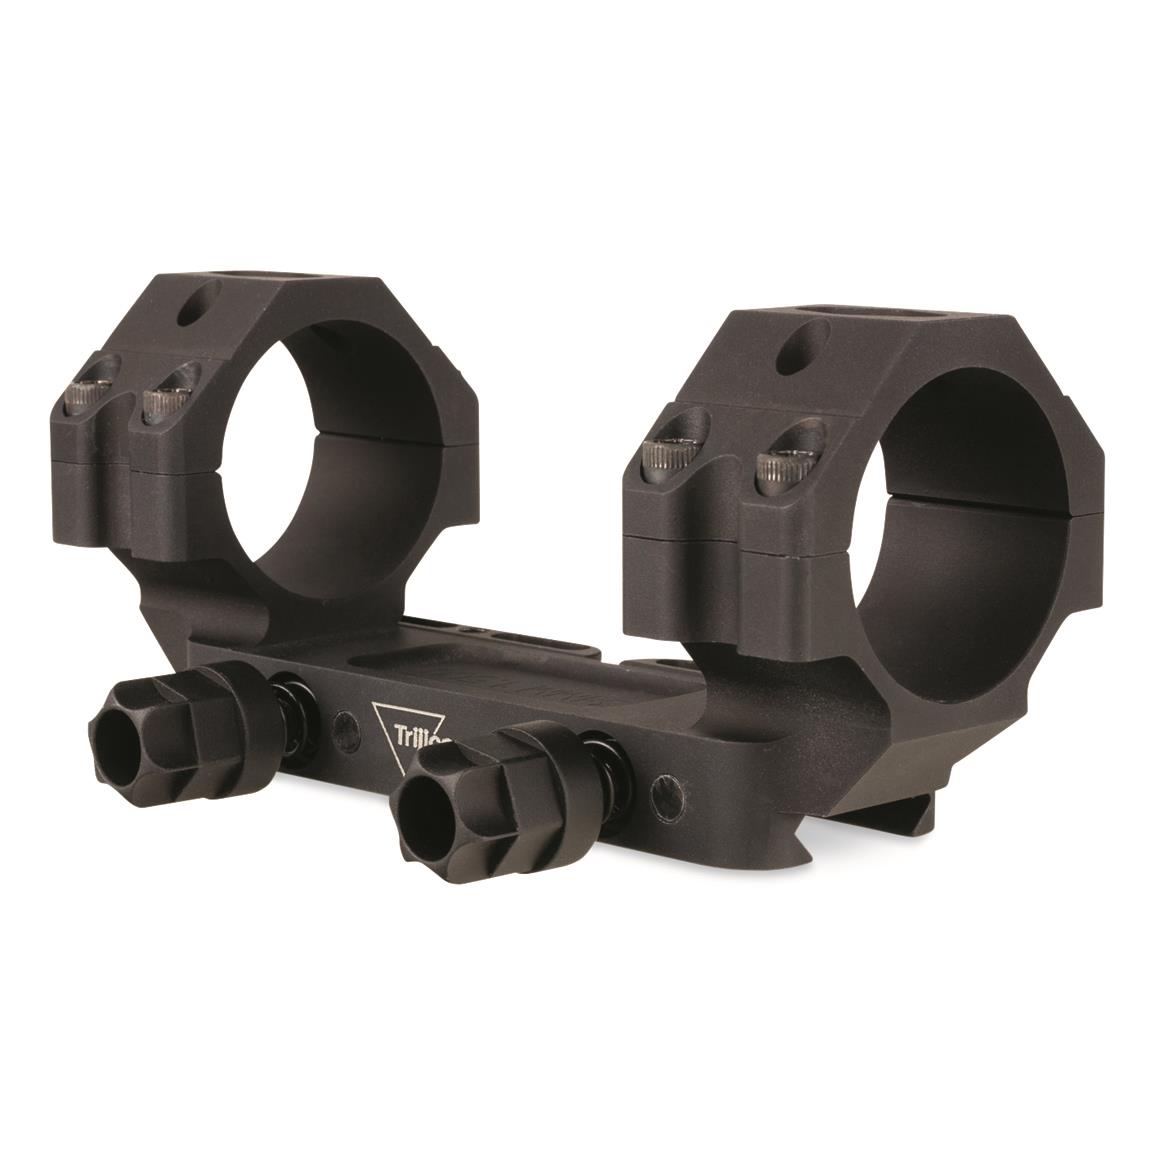 Trijicon Bolt Action Mount with Trijicon Q-LOC Technology